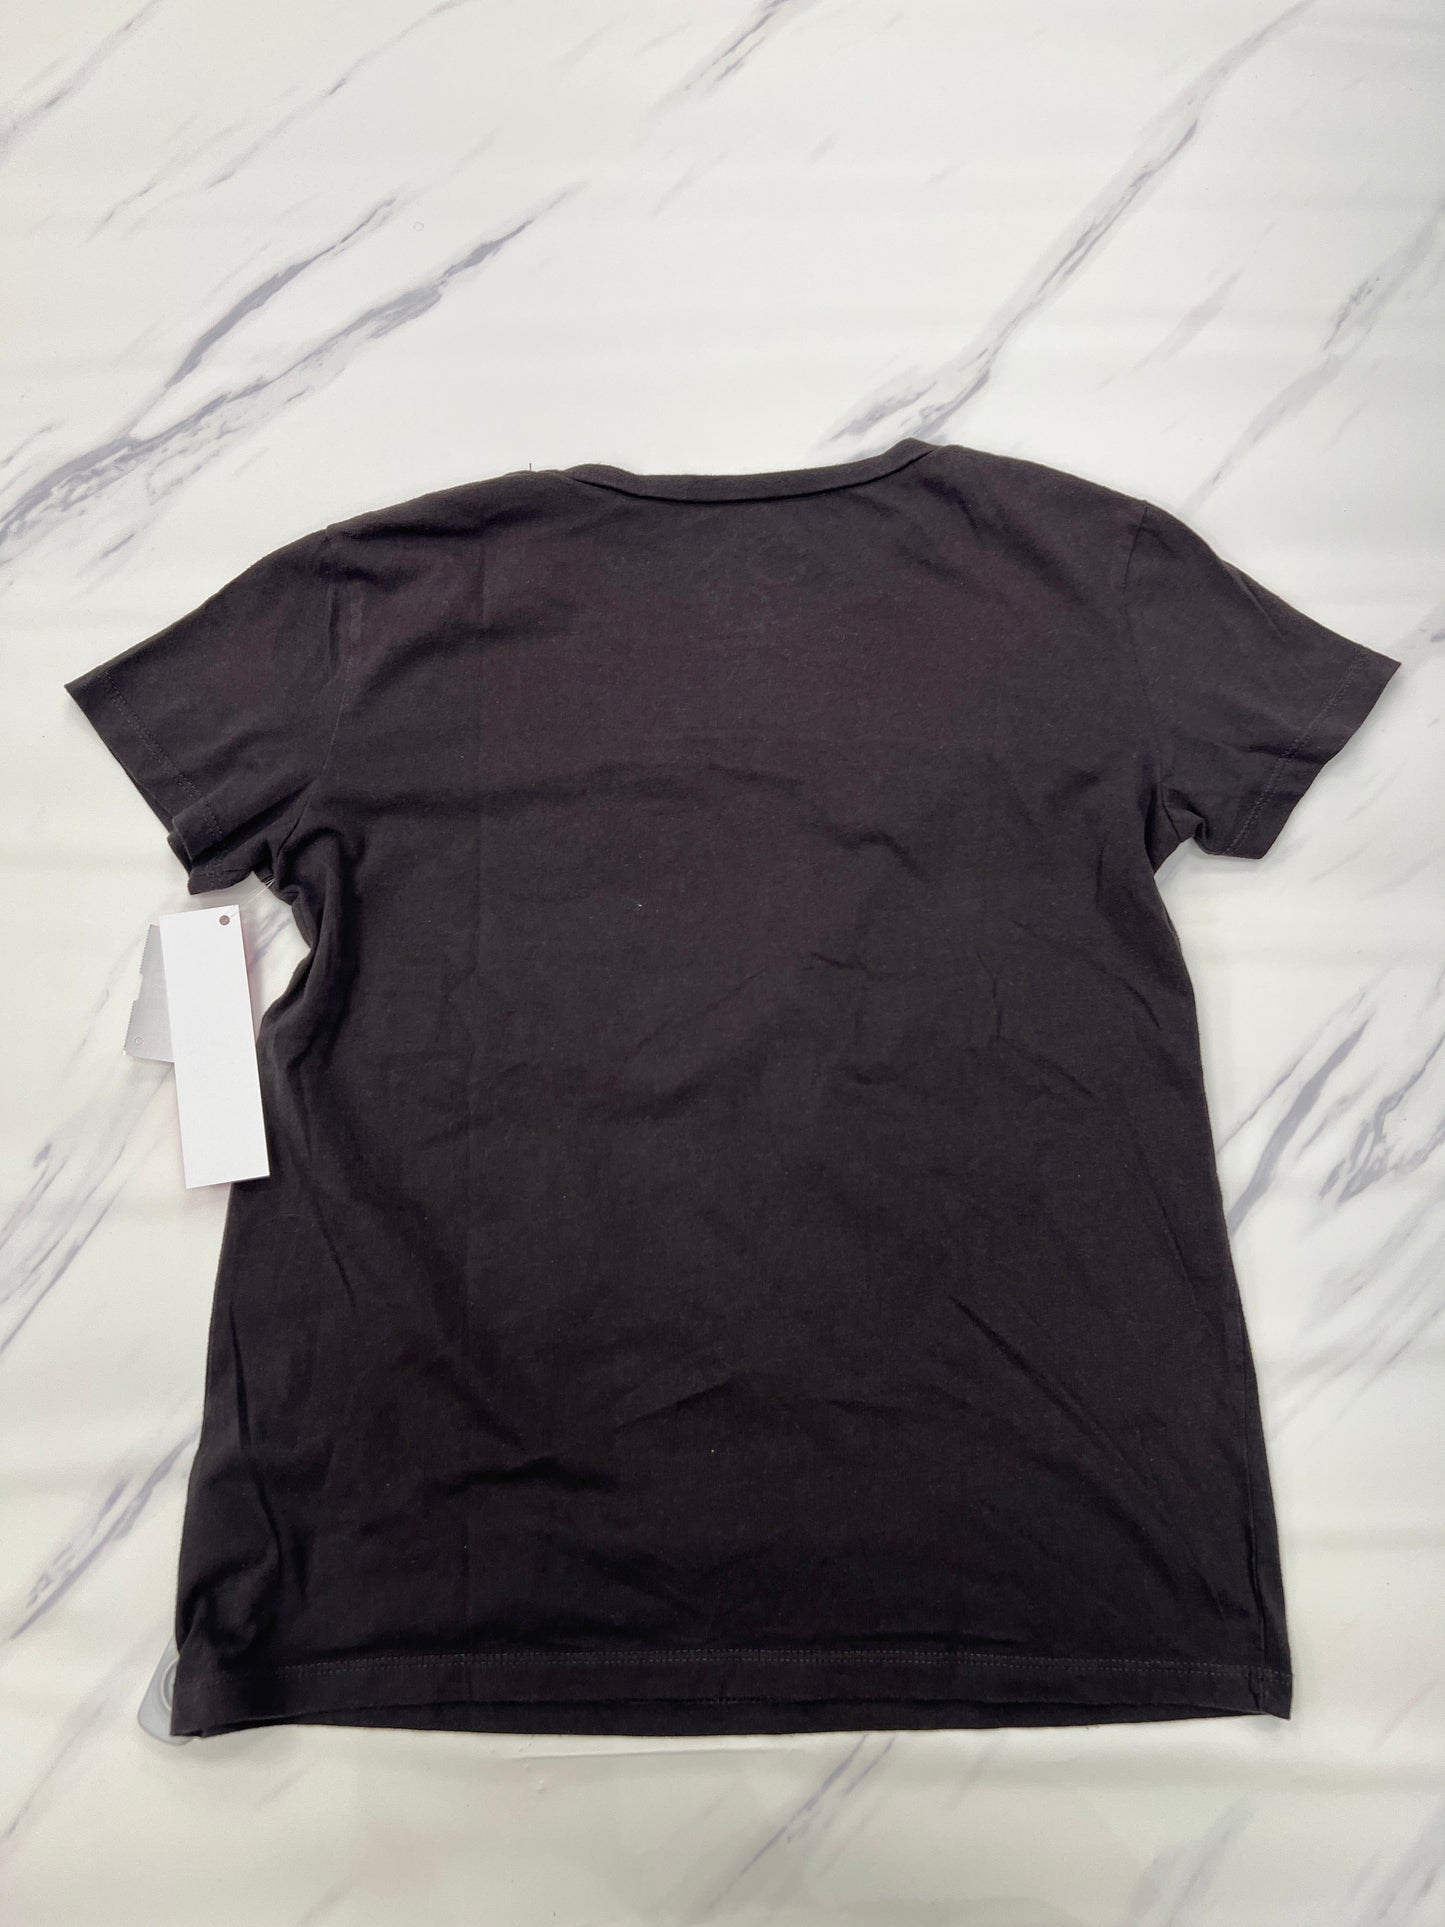 Black Top Short Sleeve Chaser, Size S